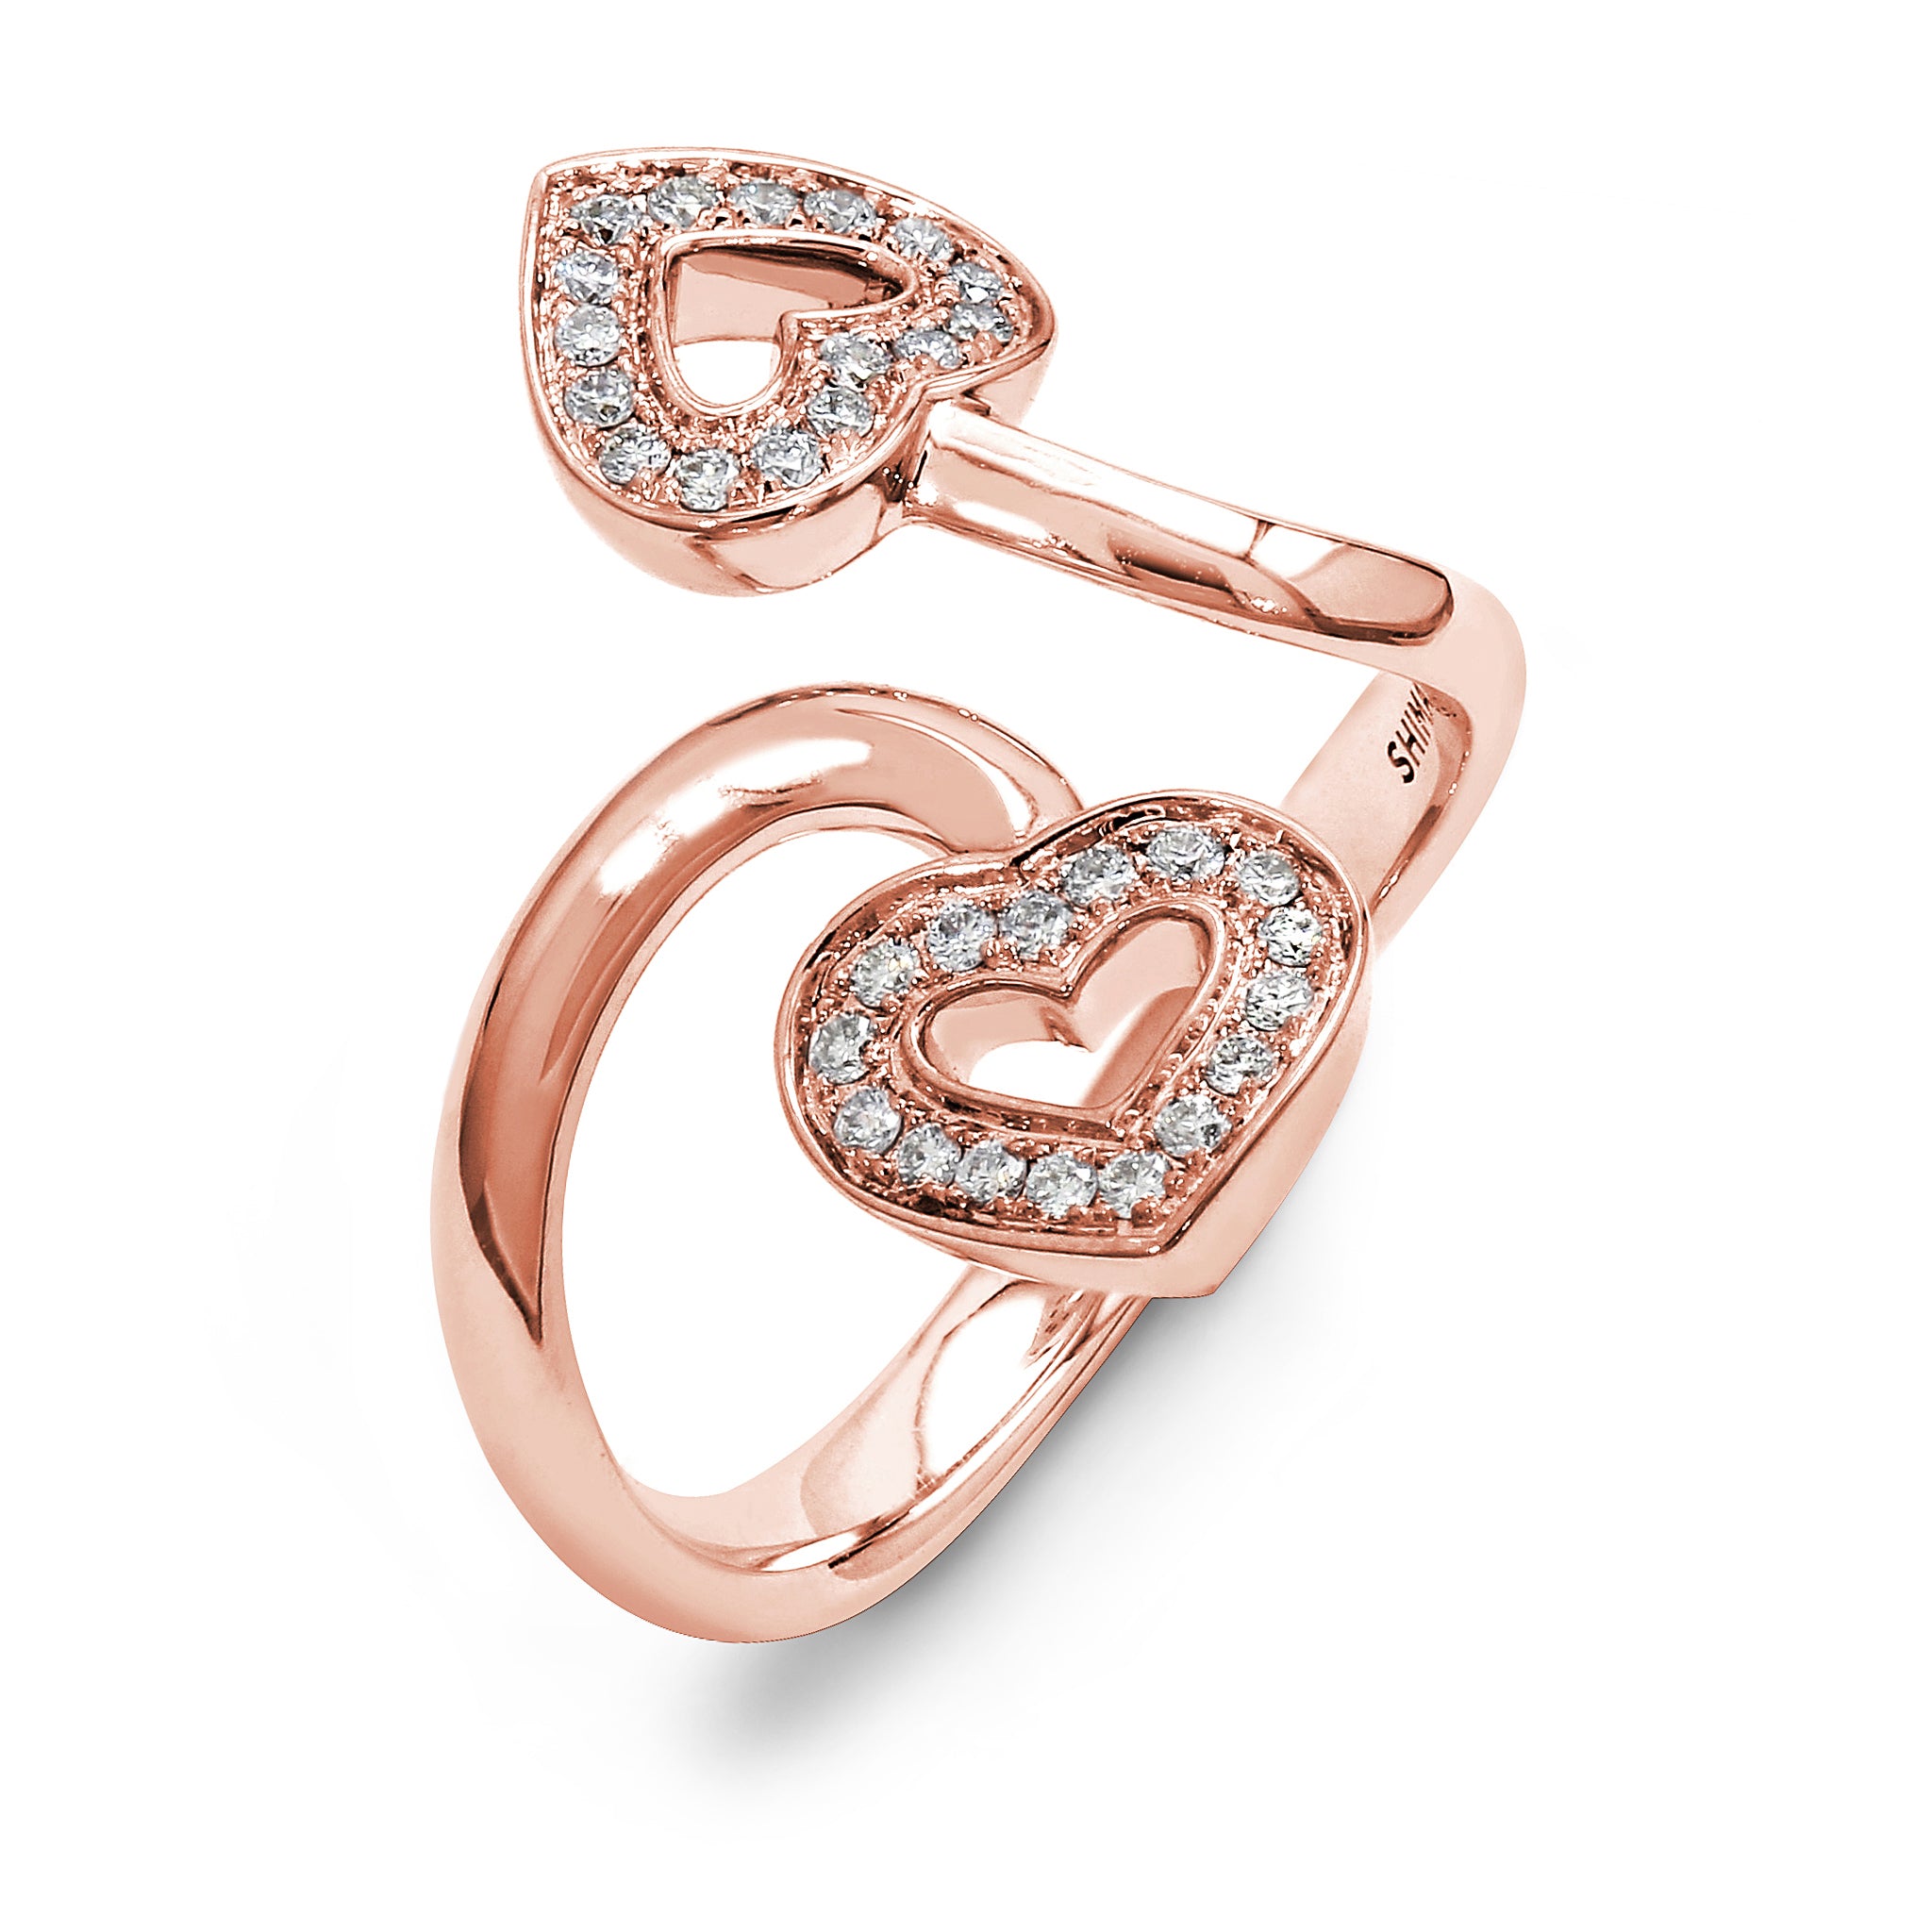 Shimansky - Two Hearts Twist Diamond Pave Ring 0.20ct crafted in 18K Rose Gold